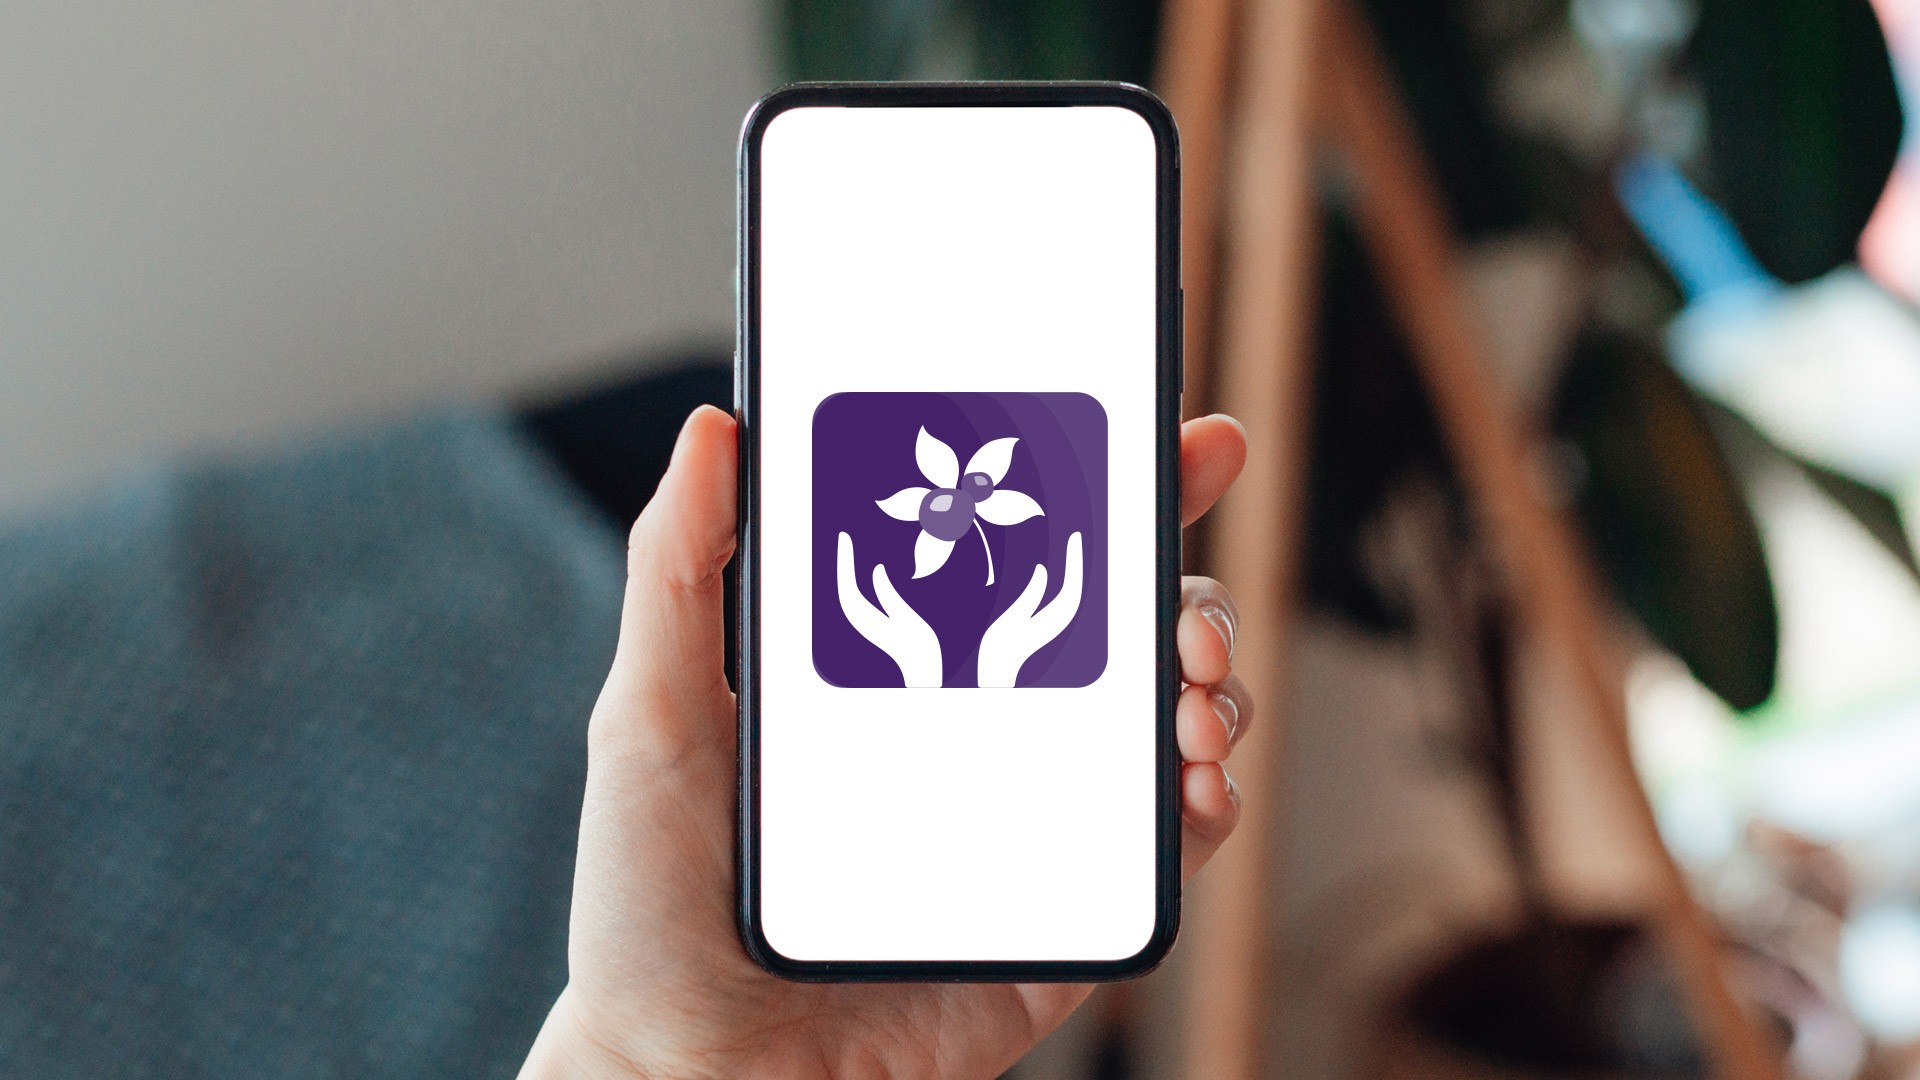 Mobile device with the Wellness App icon